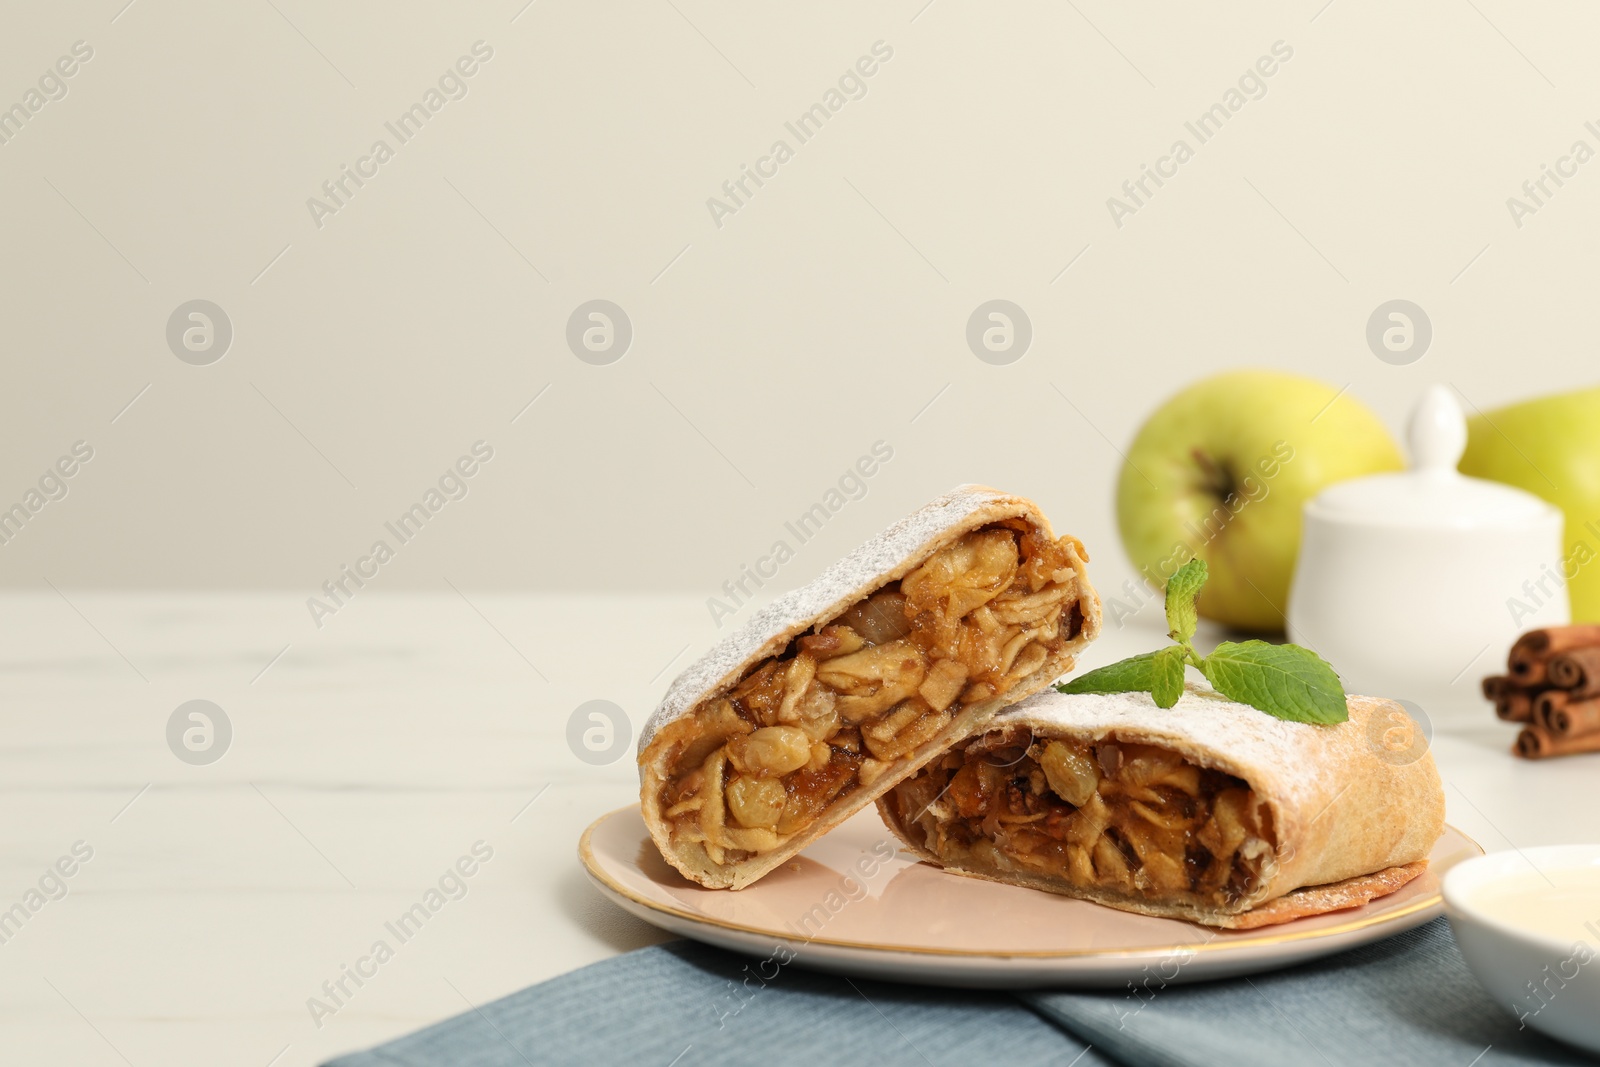 Photo of Delicious strudel with apples, nuts and raisins on white table, space for text